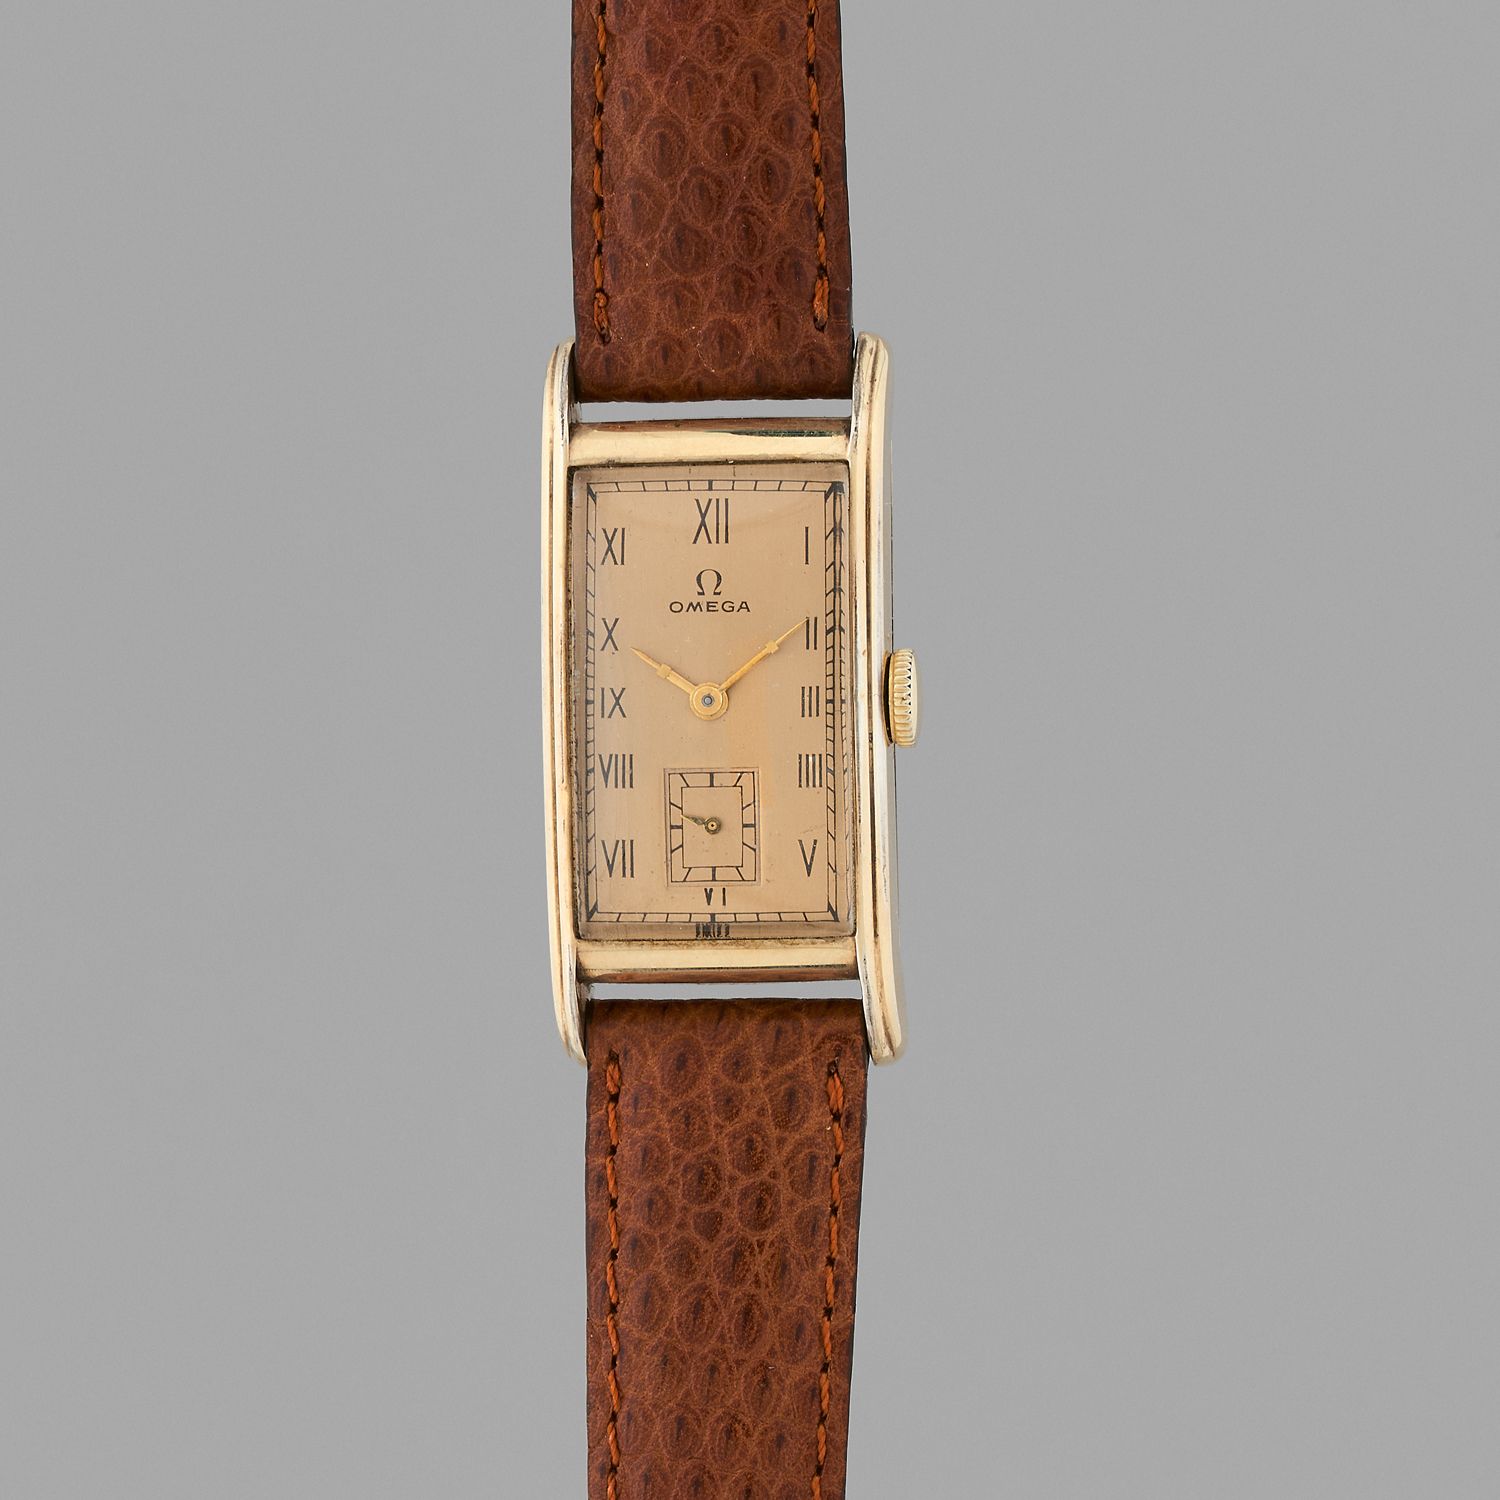 Null OMEGA
Wadsworth T 17.
Circa: 1940.
Gold-plated wristwatch. Rectangular case&hellip;